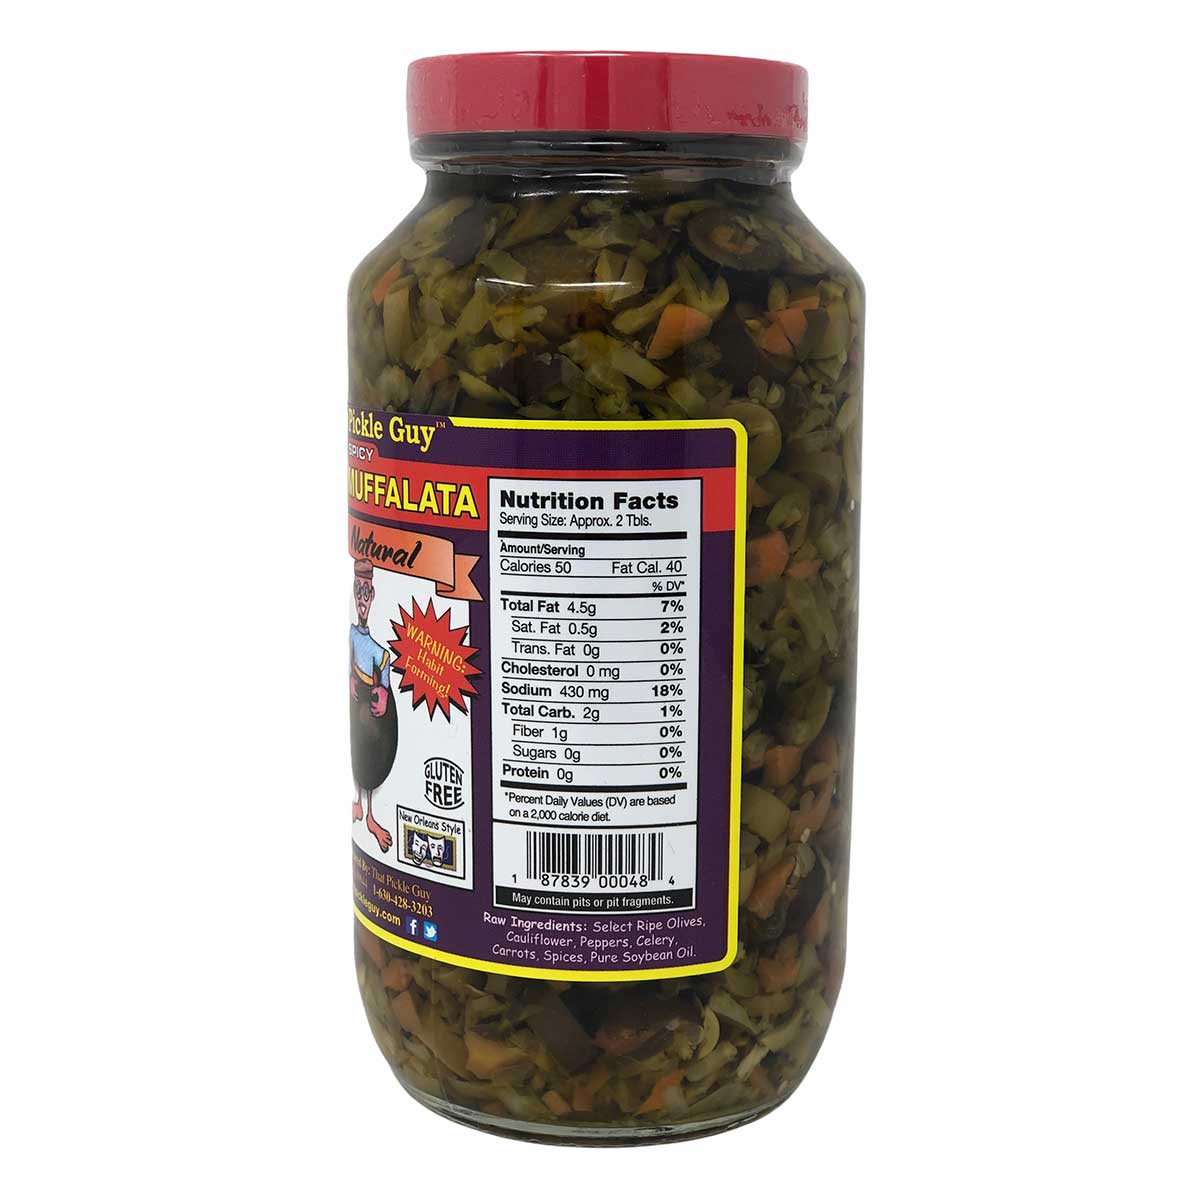 That Pickle Guy Minced All Natural Chicago Style Hot Giardiniera Raw - 24-Ounce